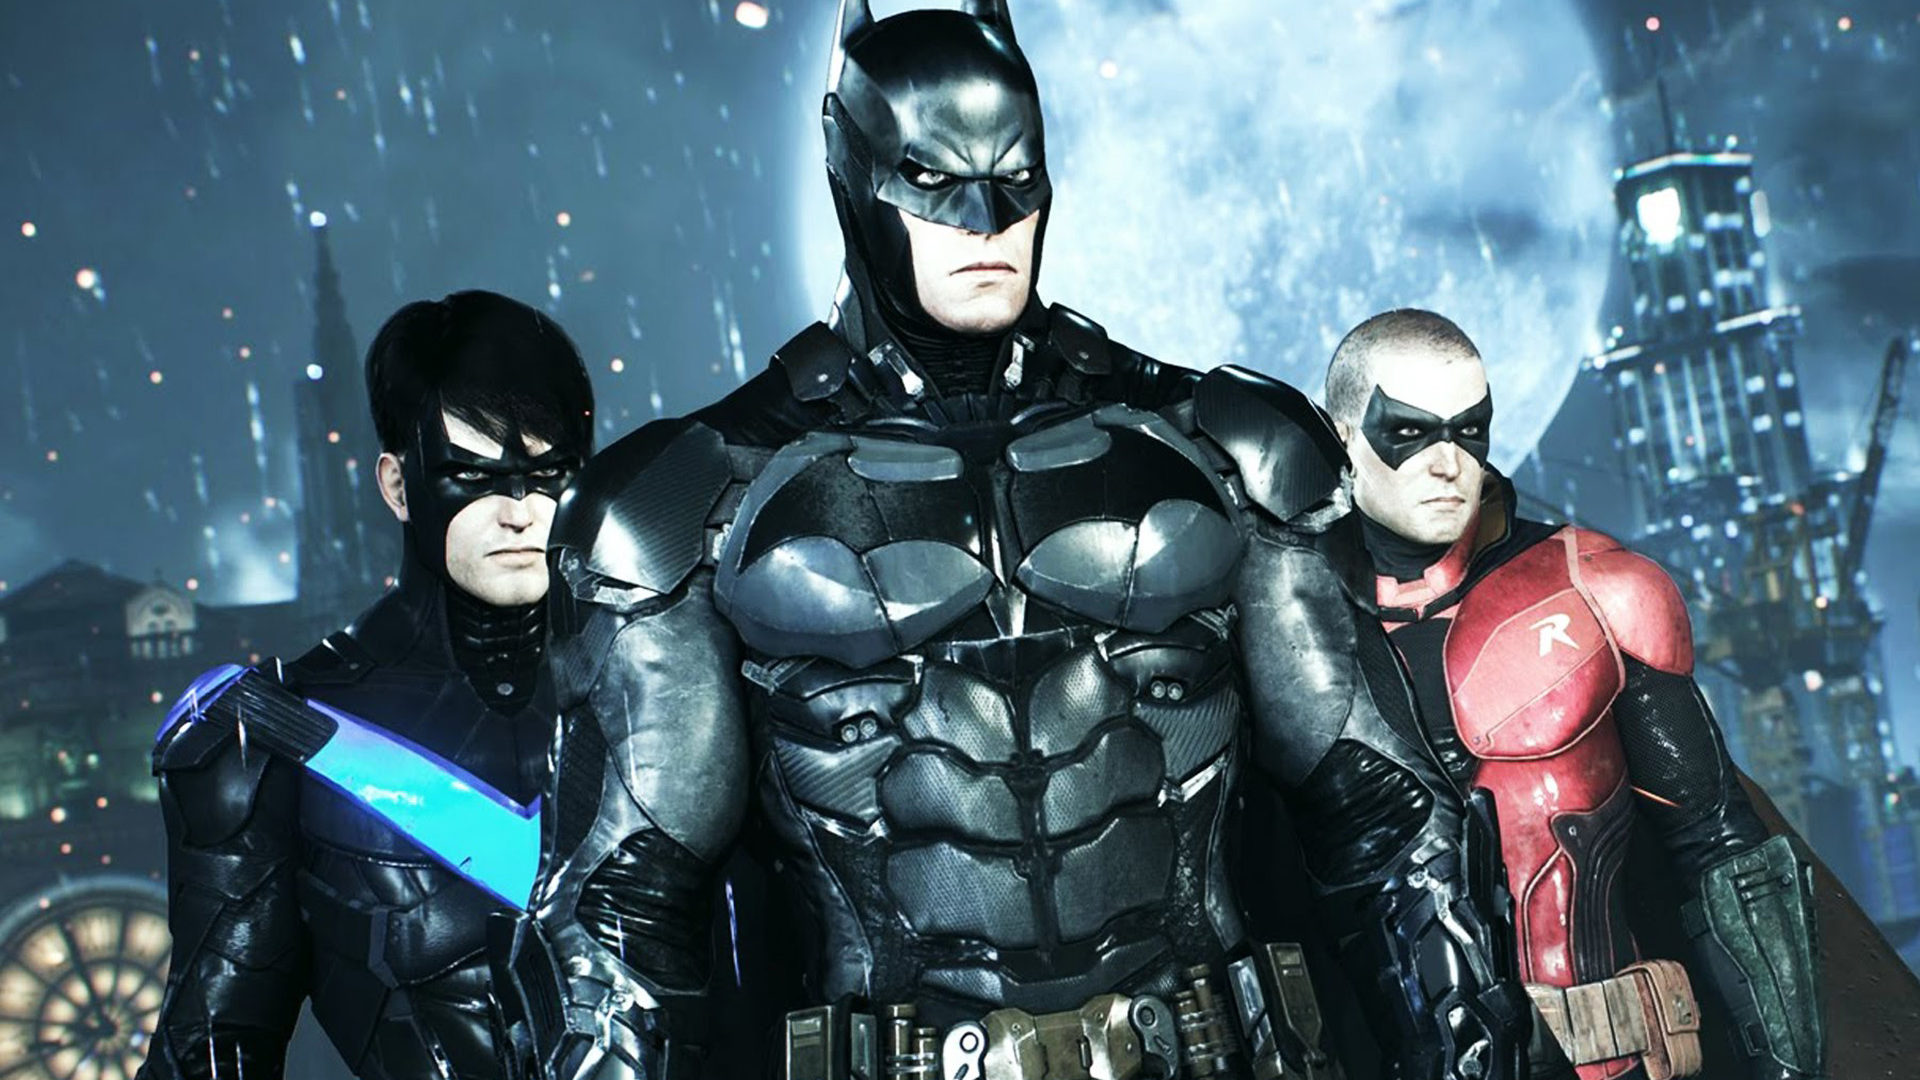 Batman-Arkham-Knight-video-game-selection-of-characters-Batman-Robin-Nightwing-and-Catwoman-1920x1080.jpg